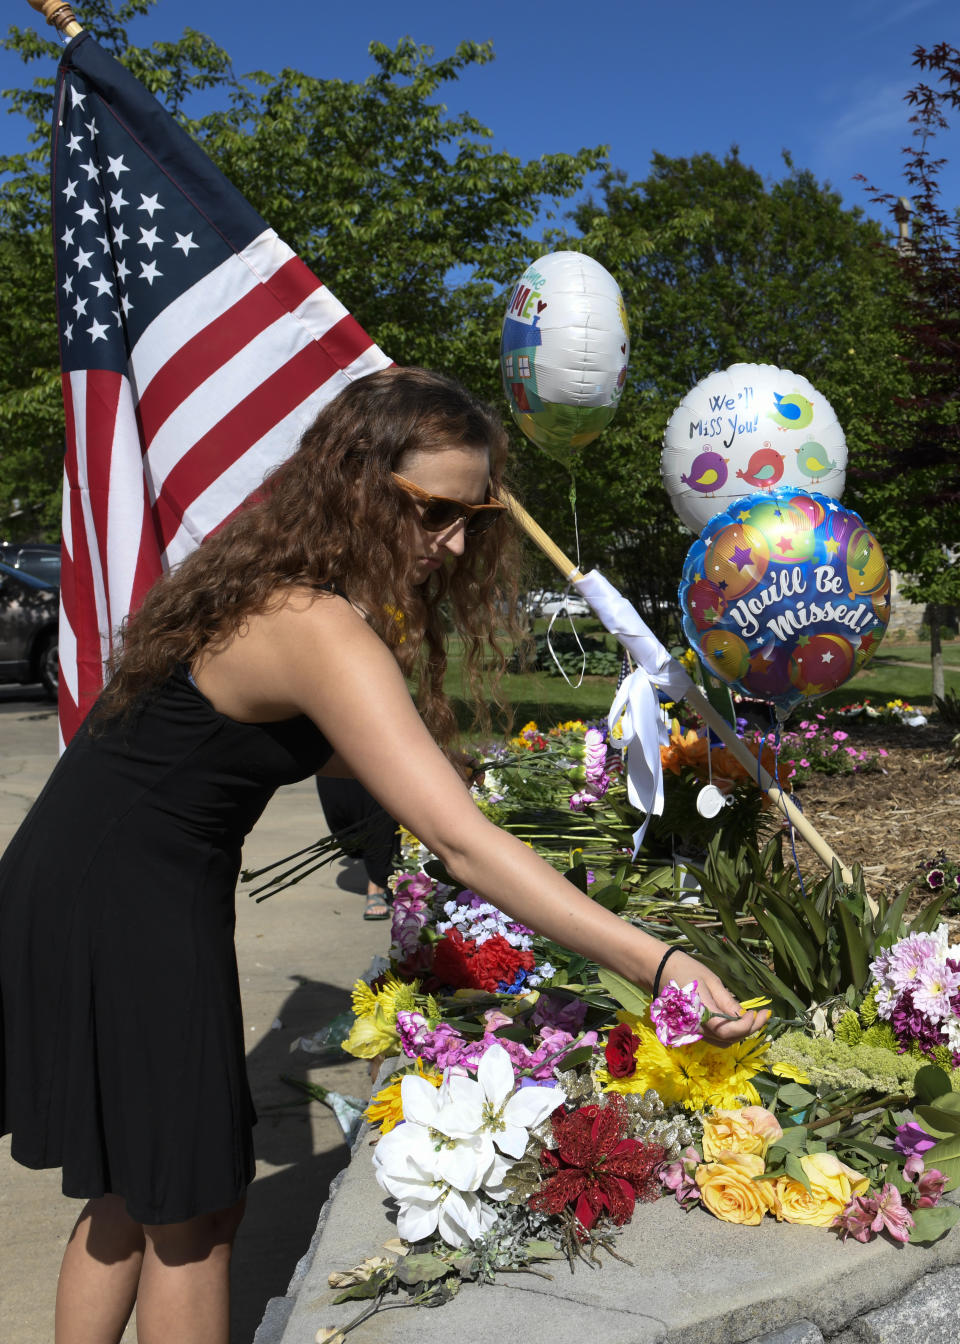 Brittney Jones, a family friend of Riley Howell, places flowers outside the Stuart Auditorium where his memorial service was held in Lake Junaluska, N.C., Sunday, May 5, 2019. Family, hundreds of friends and a military honor guard on Sunday remembered Howell, a North Carolina college student credited with saving classmates by rushing a gunman firing inside their lecture hall. (AP Photo/Kathy Kmonicek)